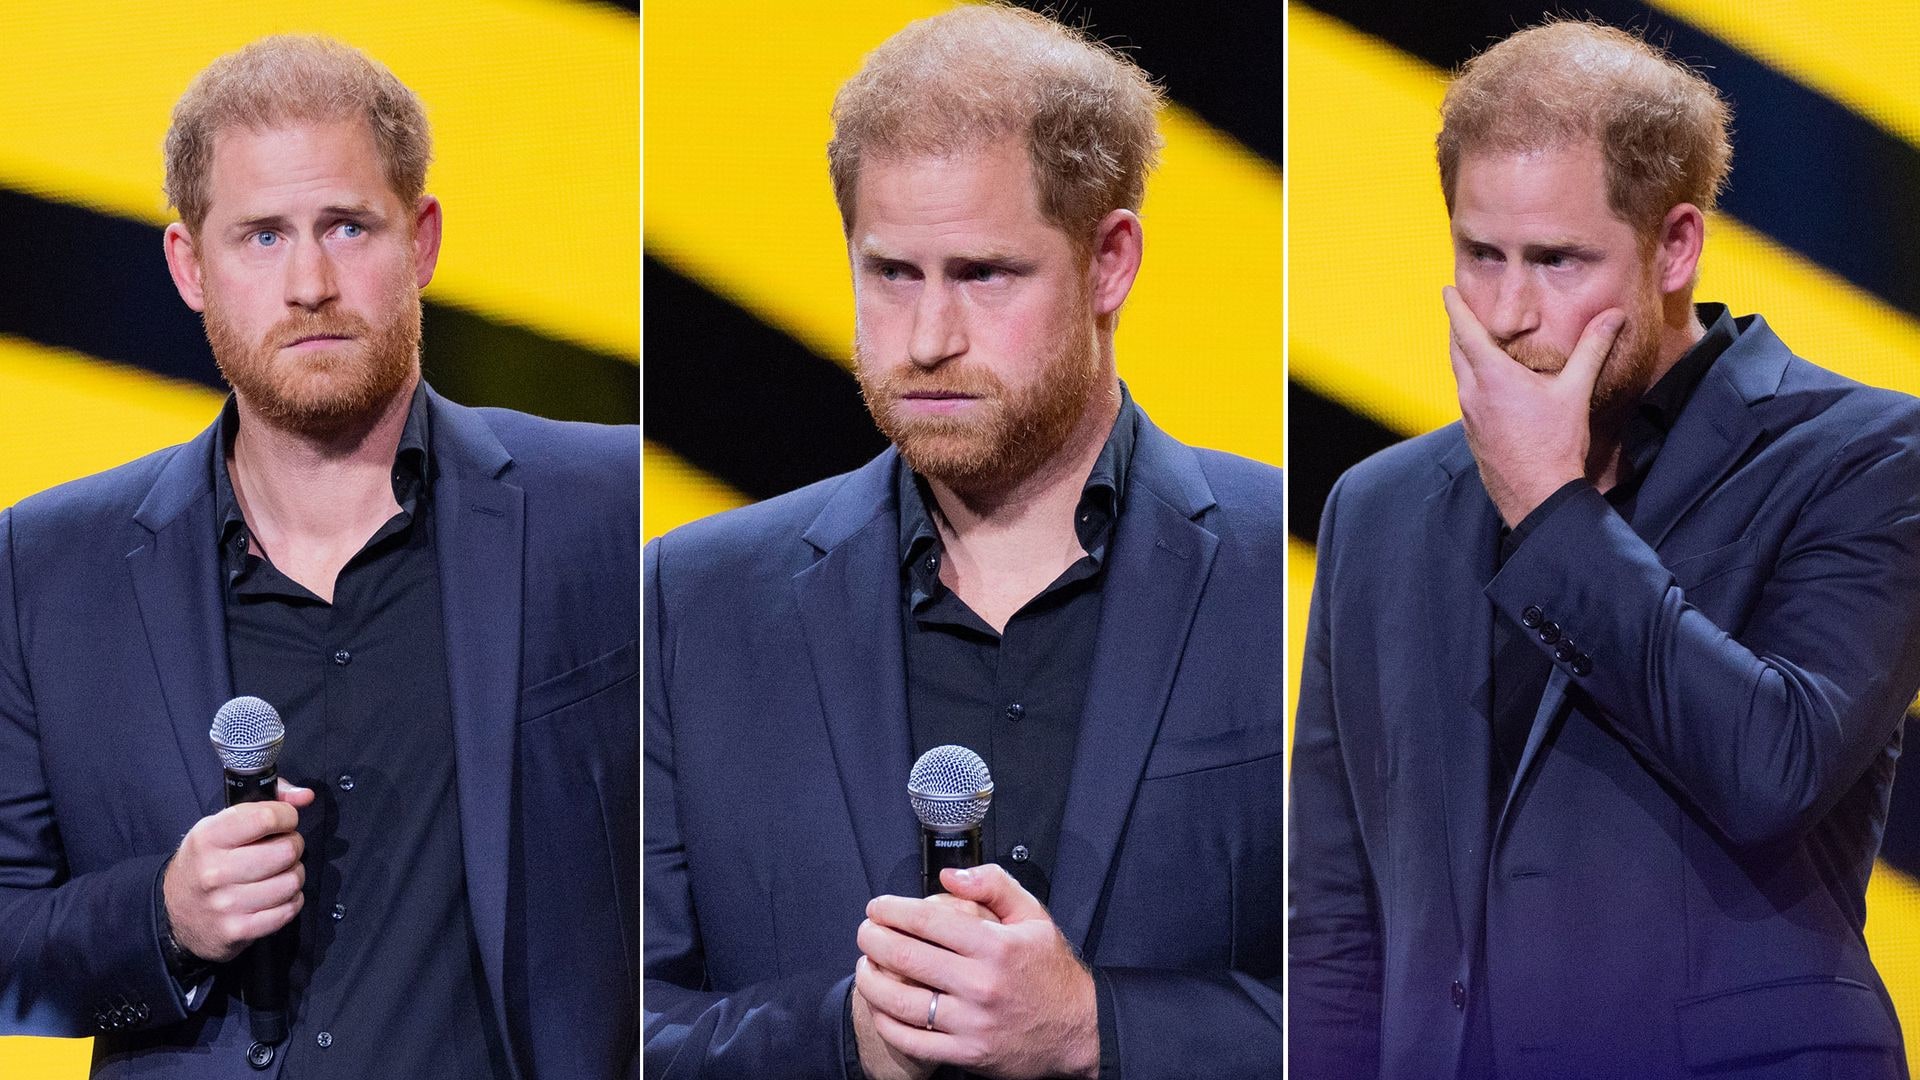 Prince Harry appeared emotional during his speech